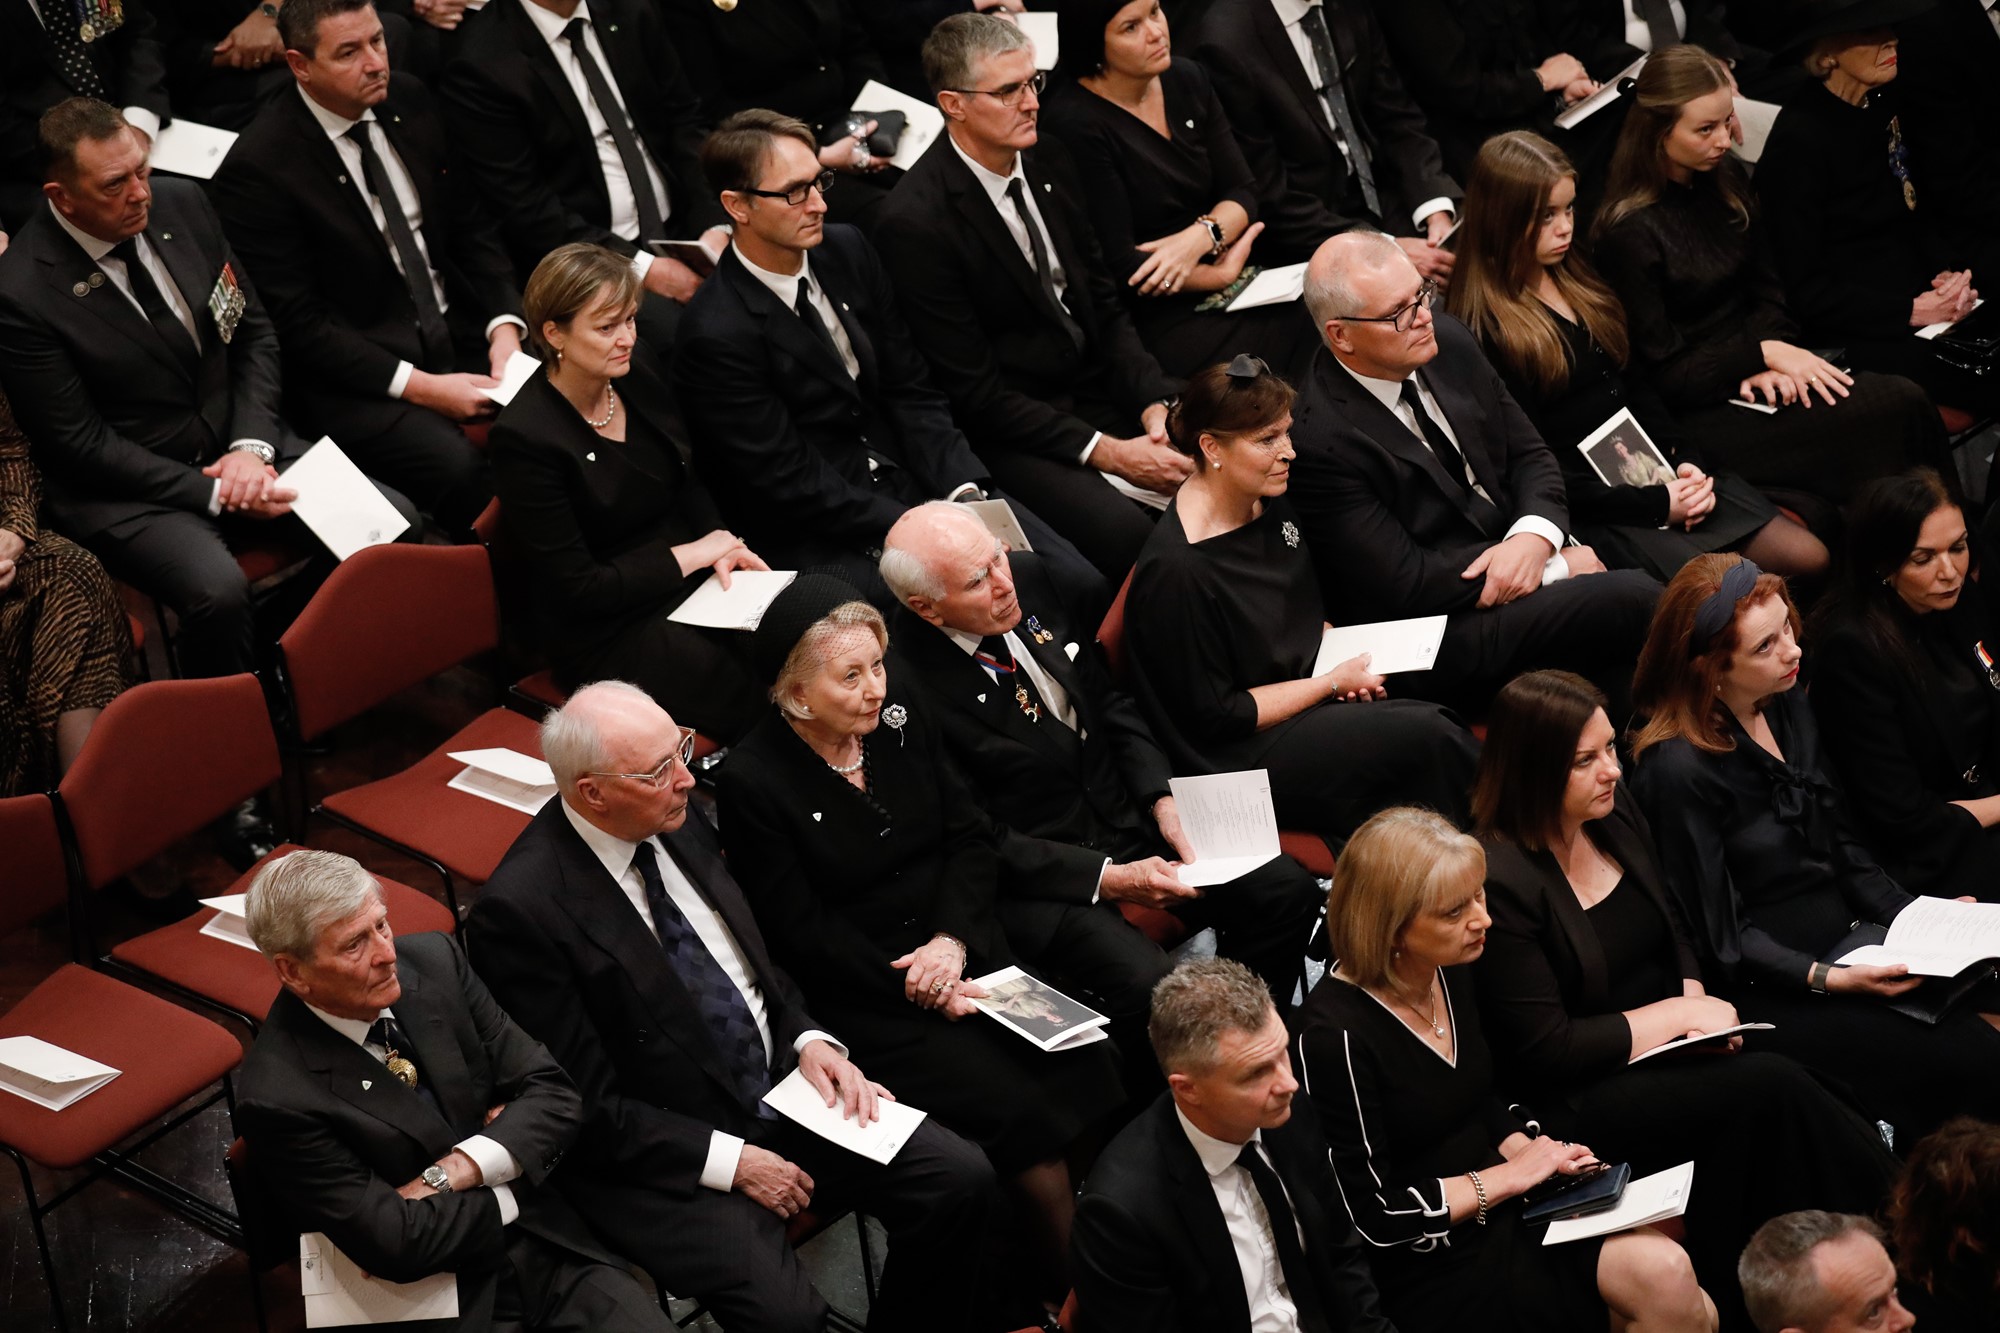 People sit in the Great Hall at the Queen's memorial service.